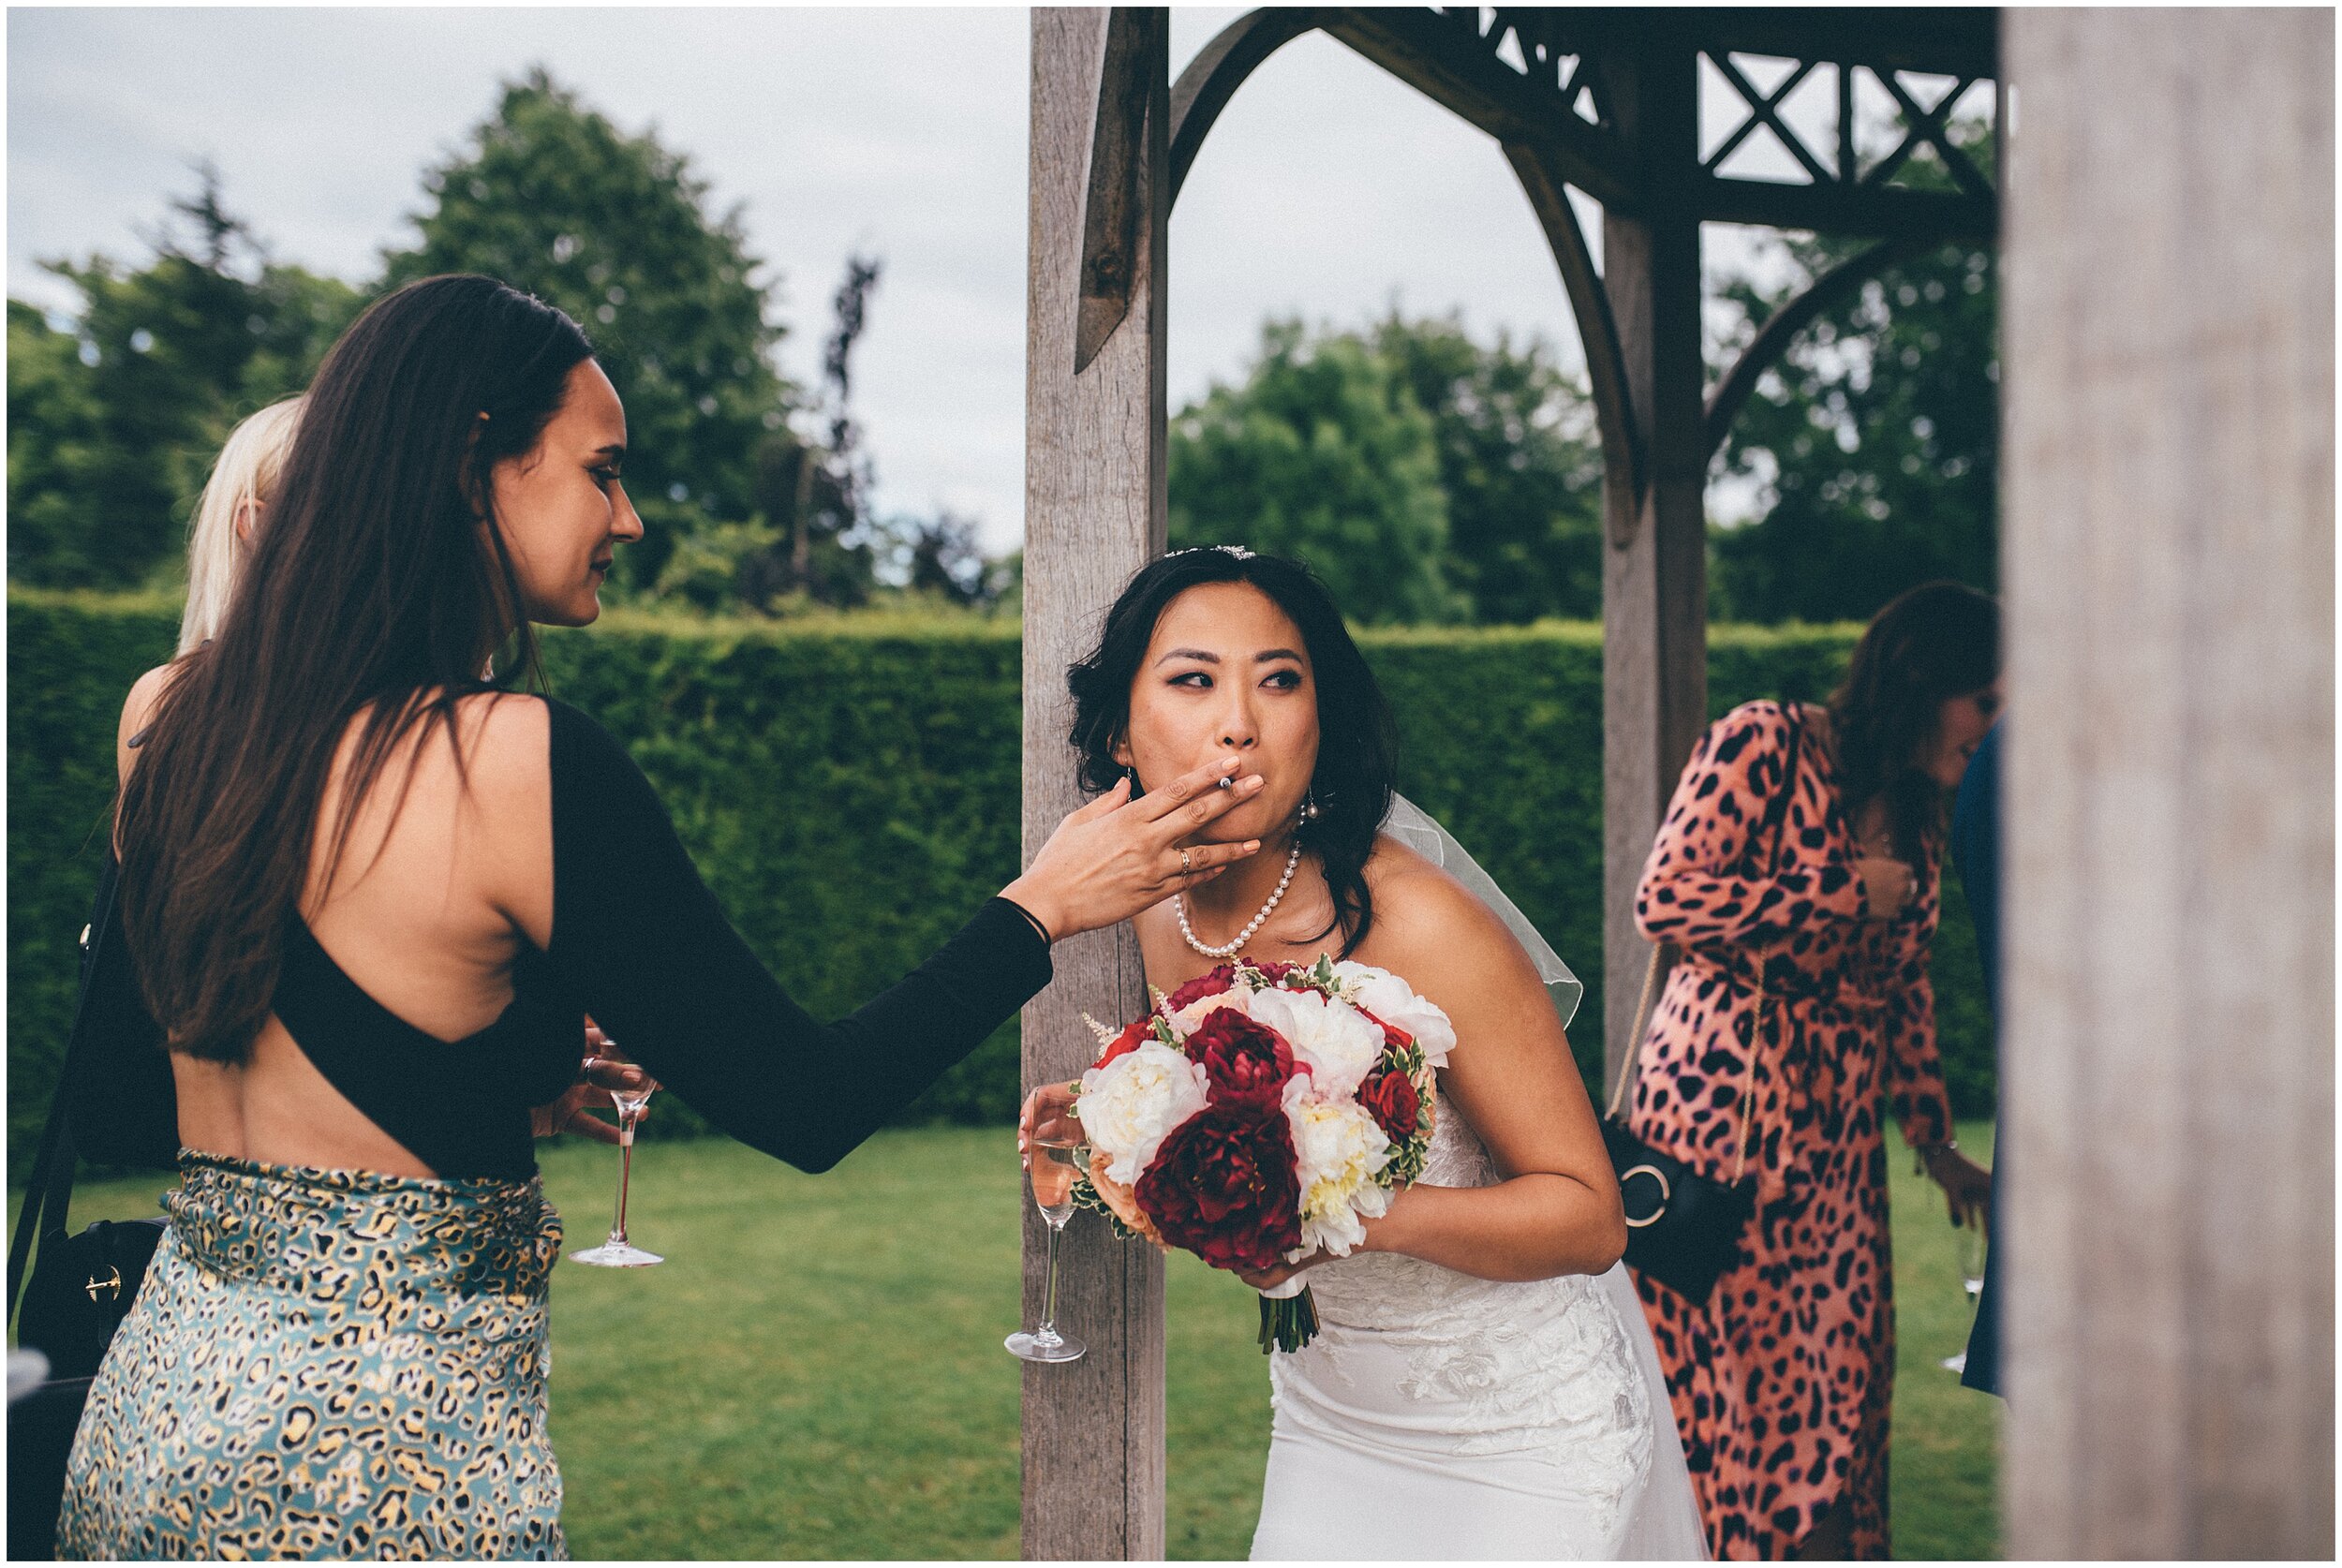 Bride sneaks a cigarette and smokes secretly on her wedding day.